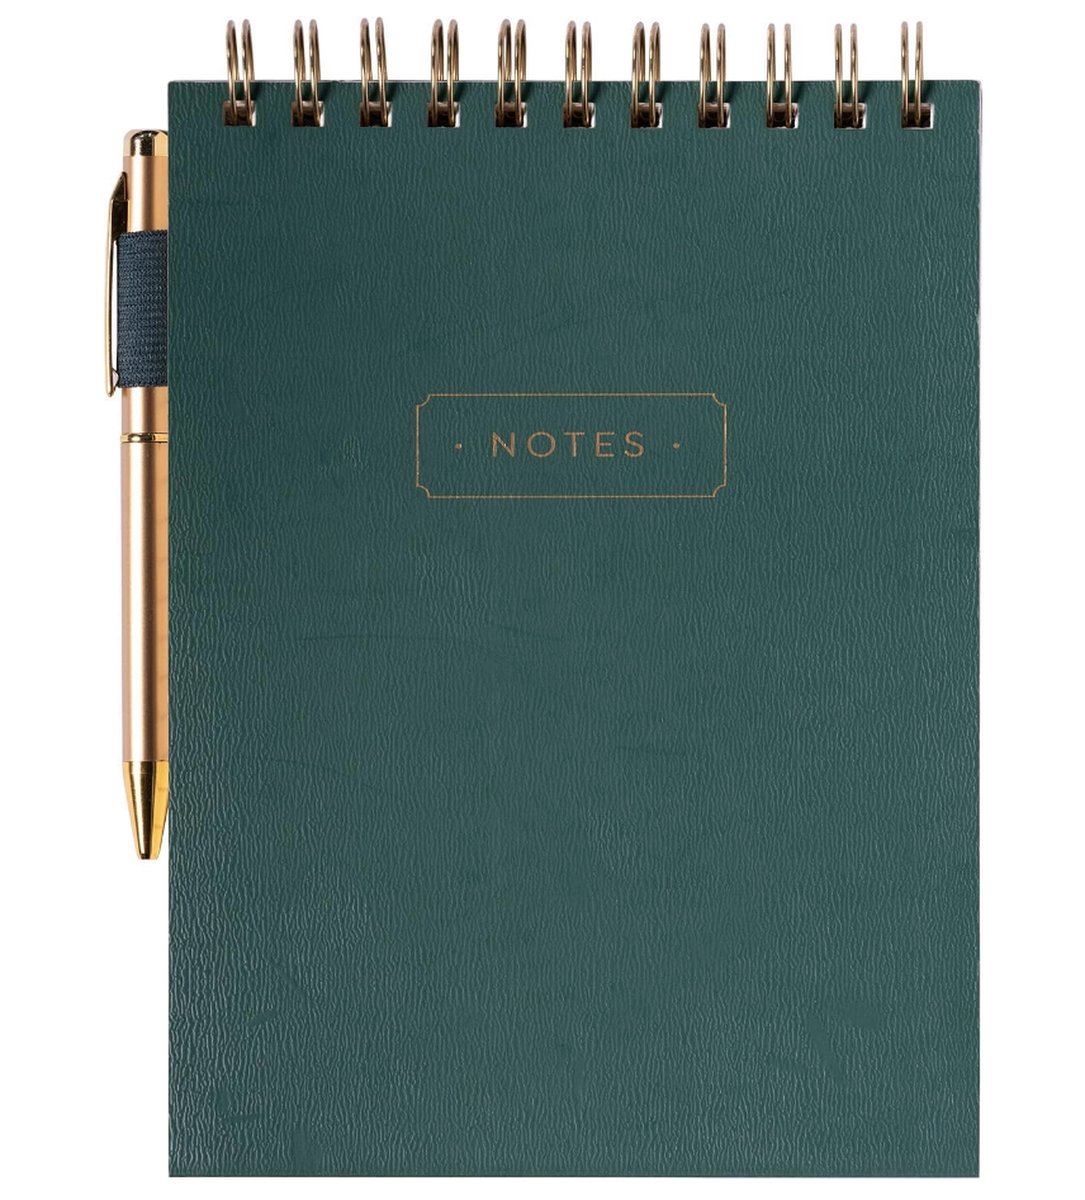 Eccolo Lined Top Spiral Notebook, Flexi-Cover Steno Pad with Pen Included (240 Perforated Pages), Notes